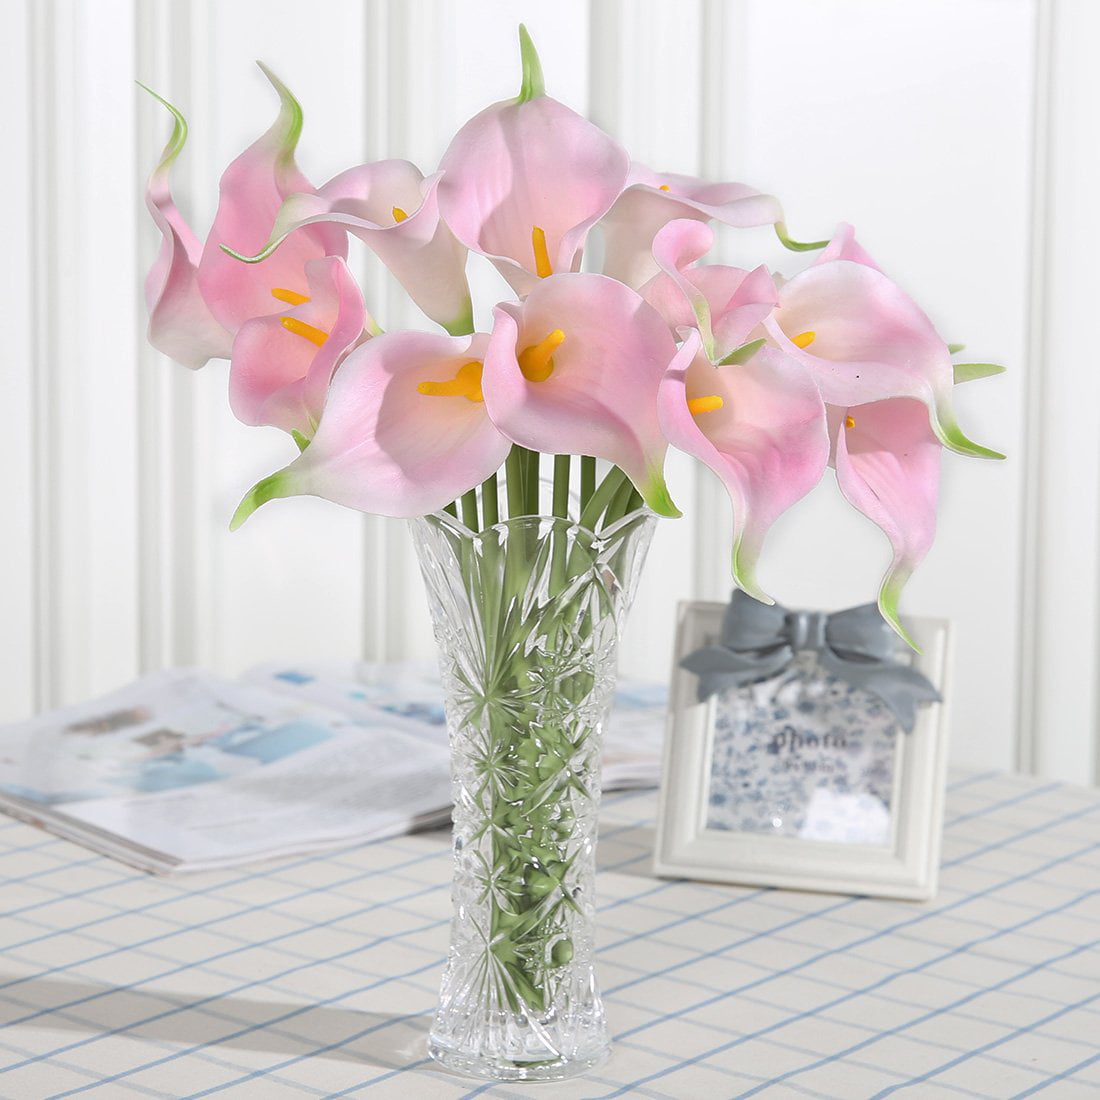 Tifuly 24 PCS Artificial Latex Calla Lilies Office,Wedding Decoration,Floral Arrangements Bianca Realistic Calla Lily Flower Bouquet for Home,Party 